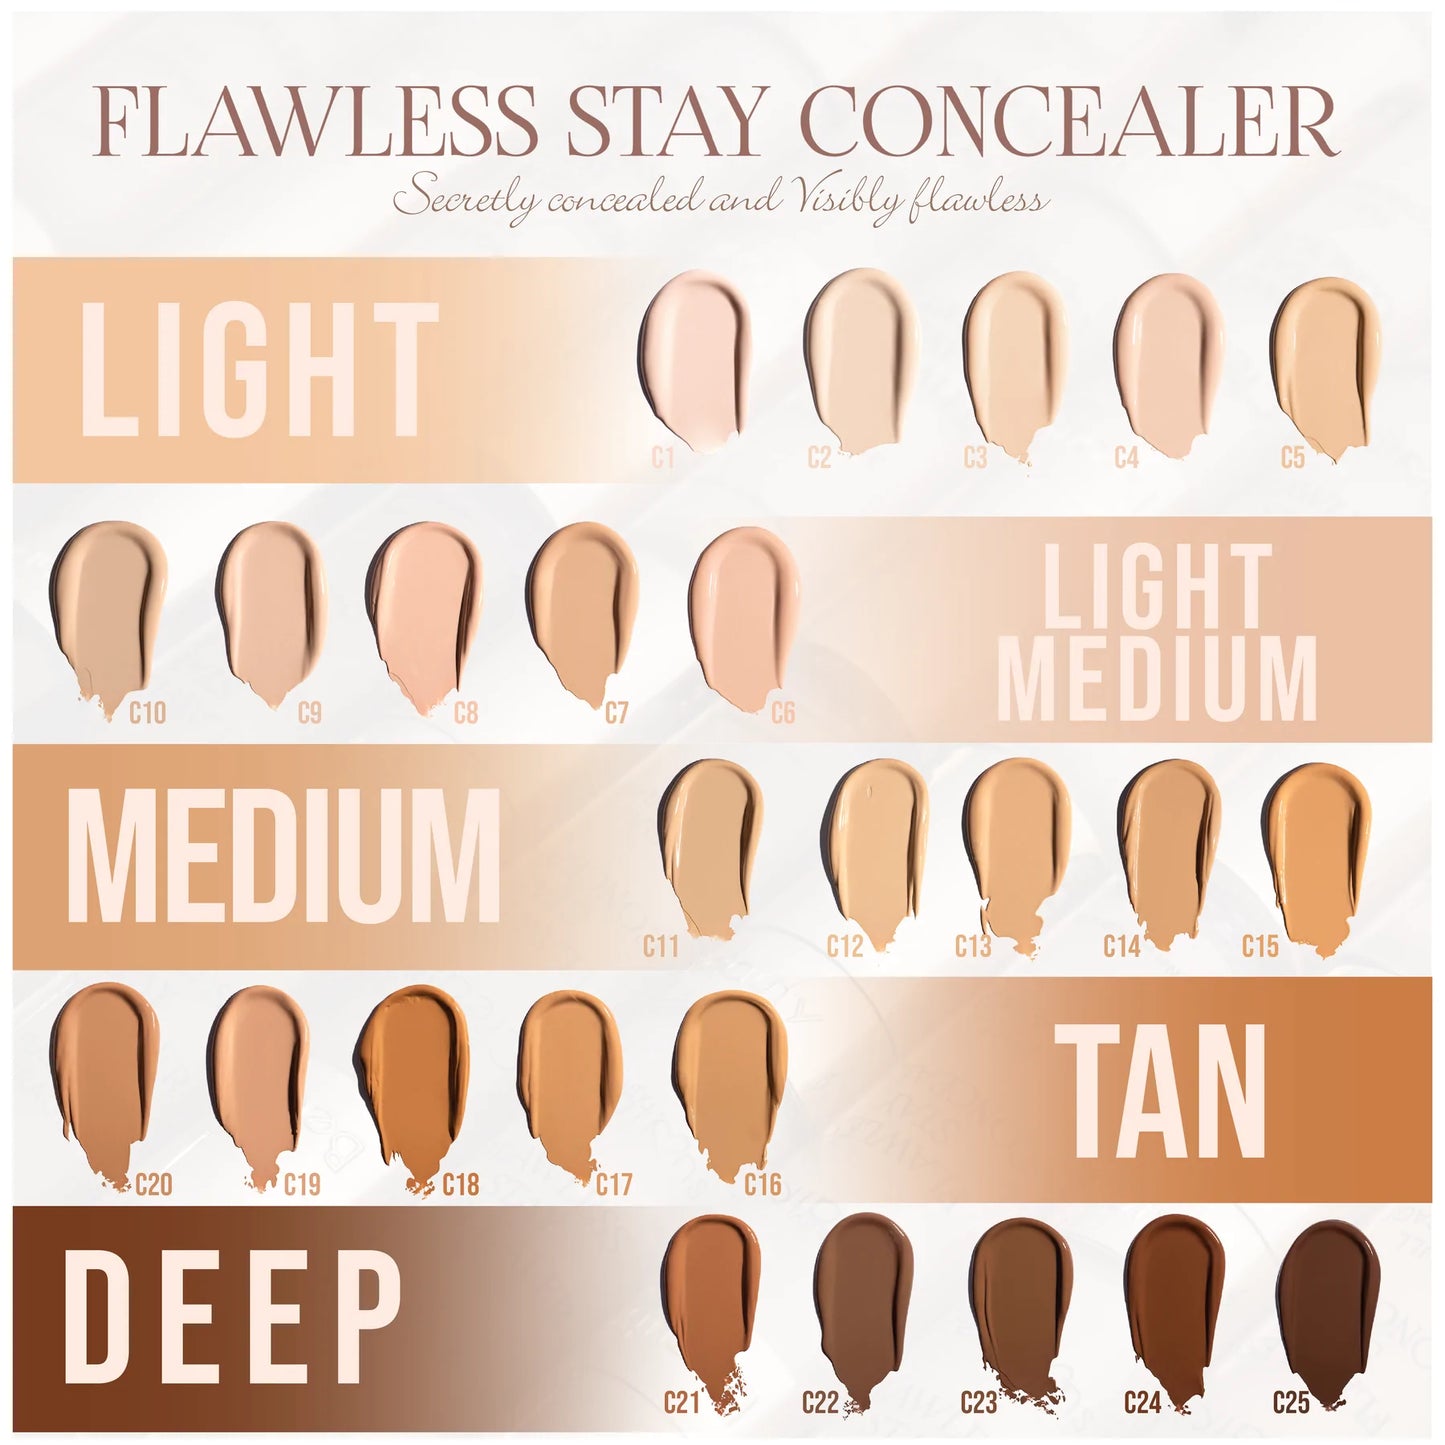 #C20 - Flawless Stay Concealer